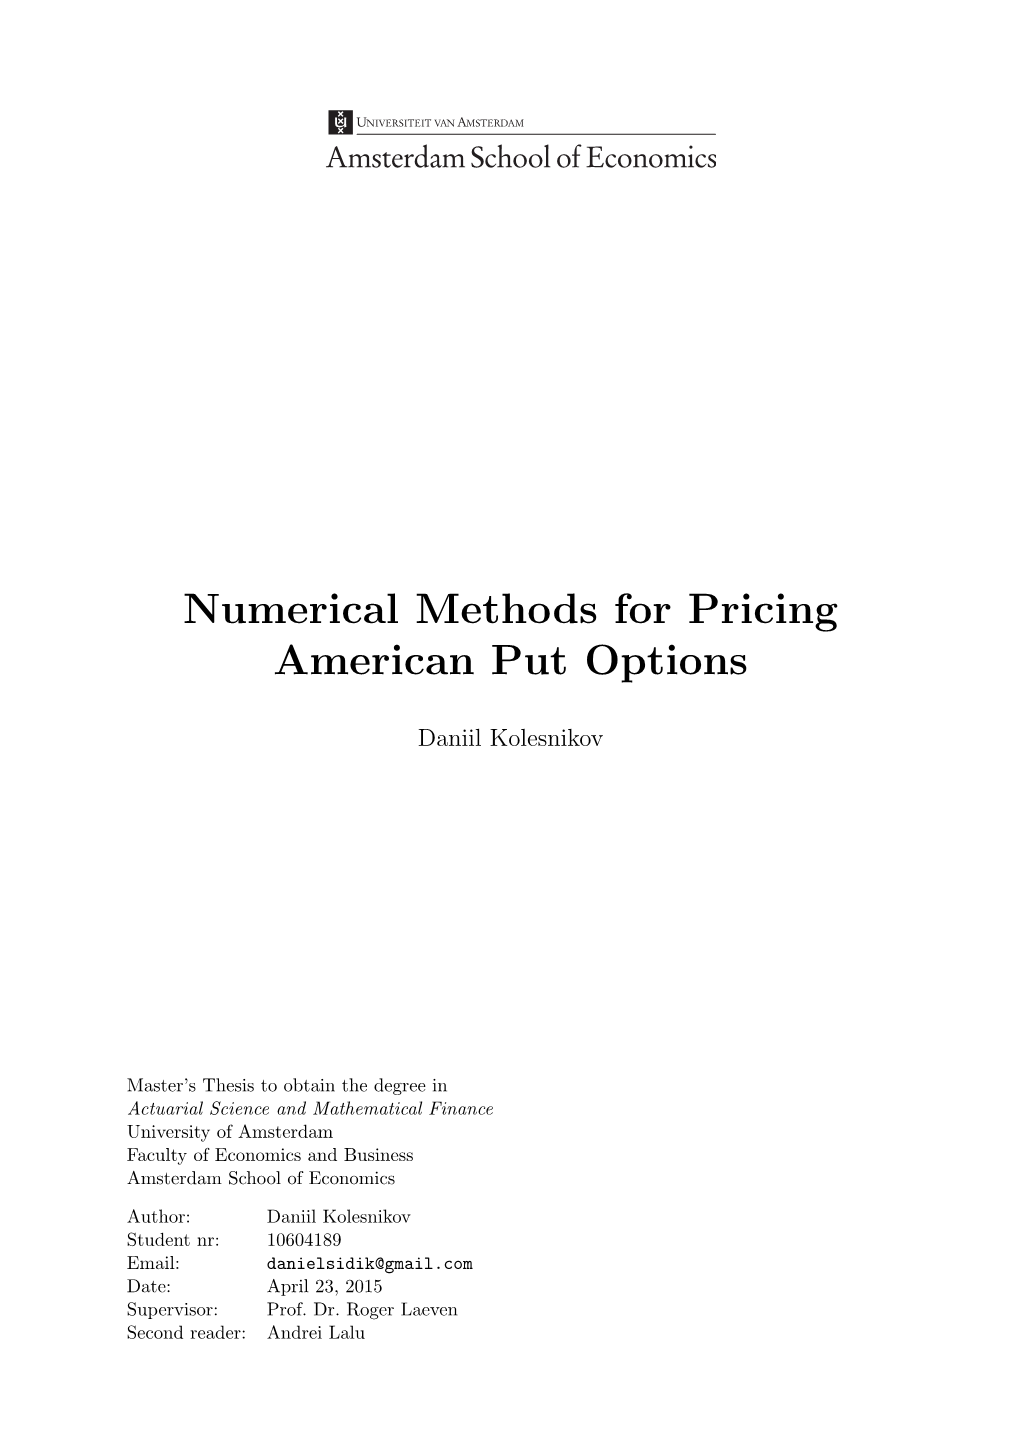 Numerical Methods for Pricing American Put Options